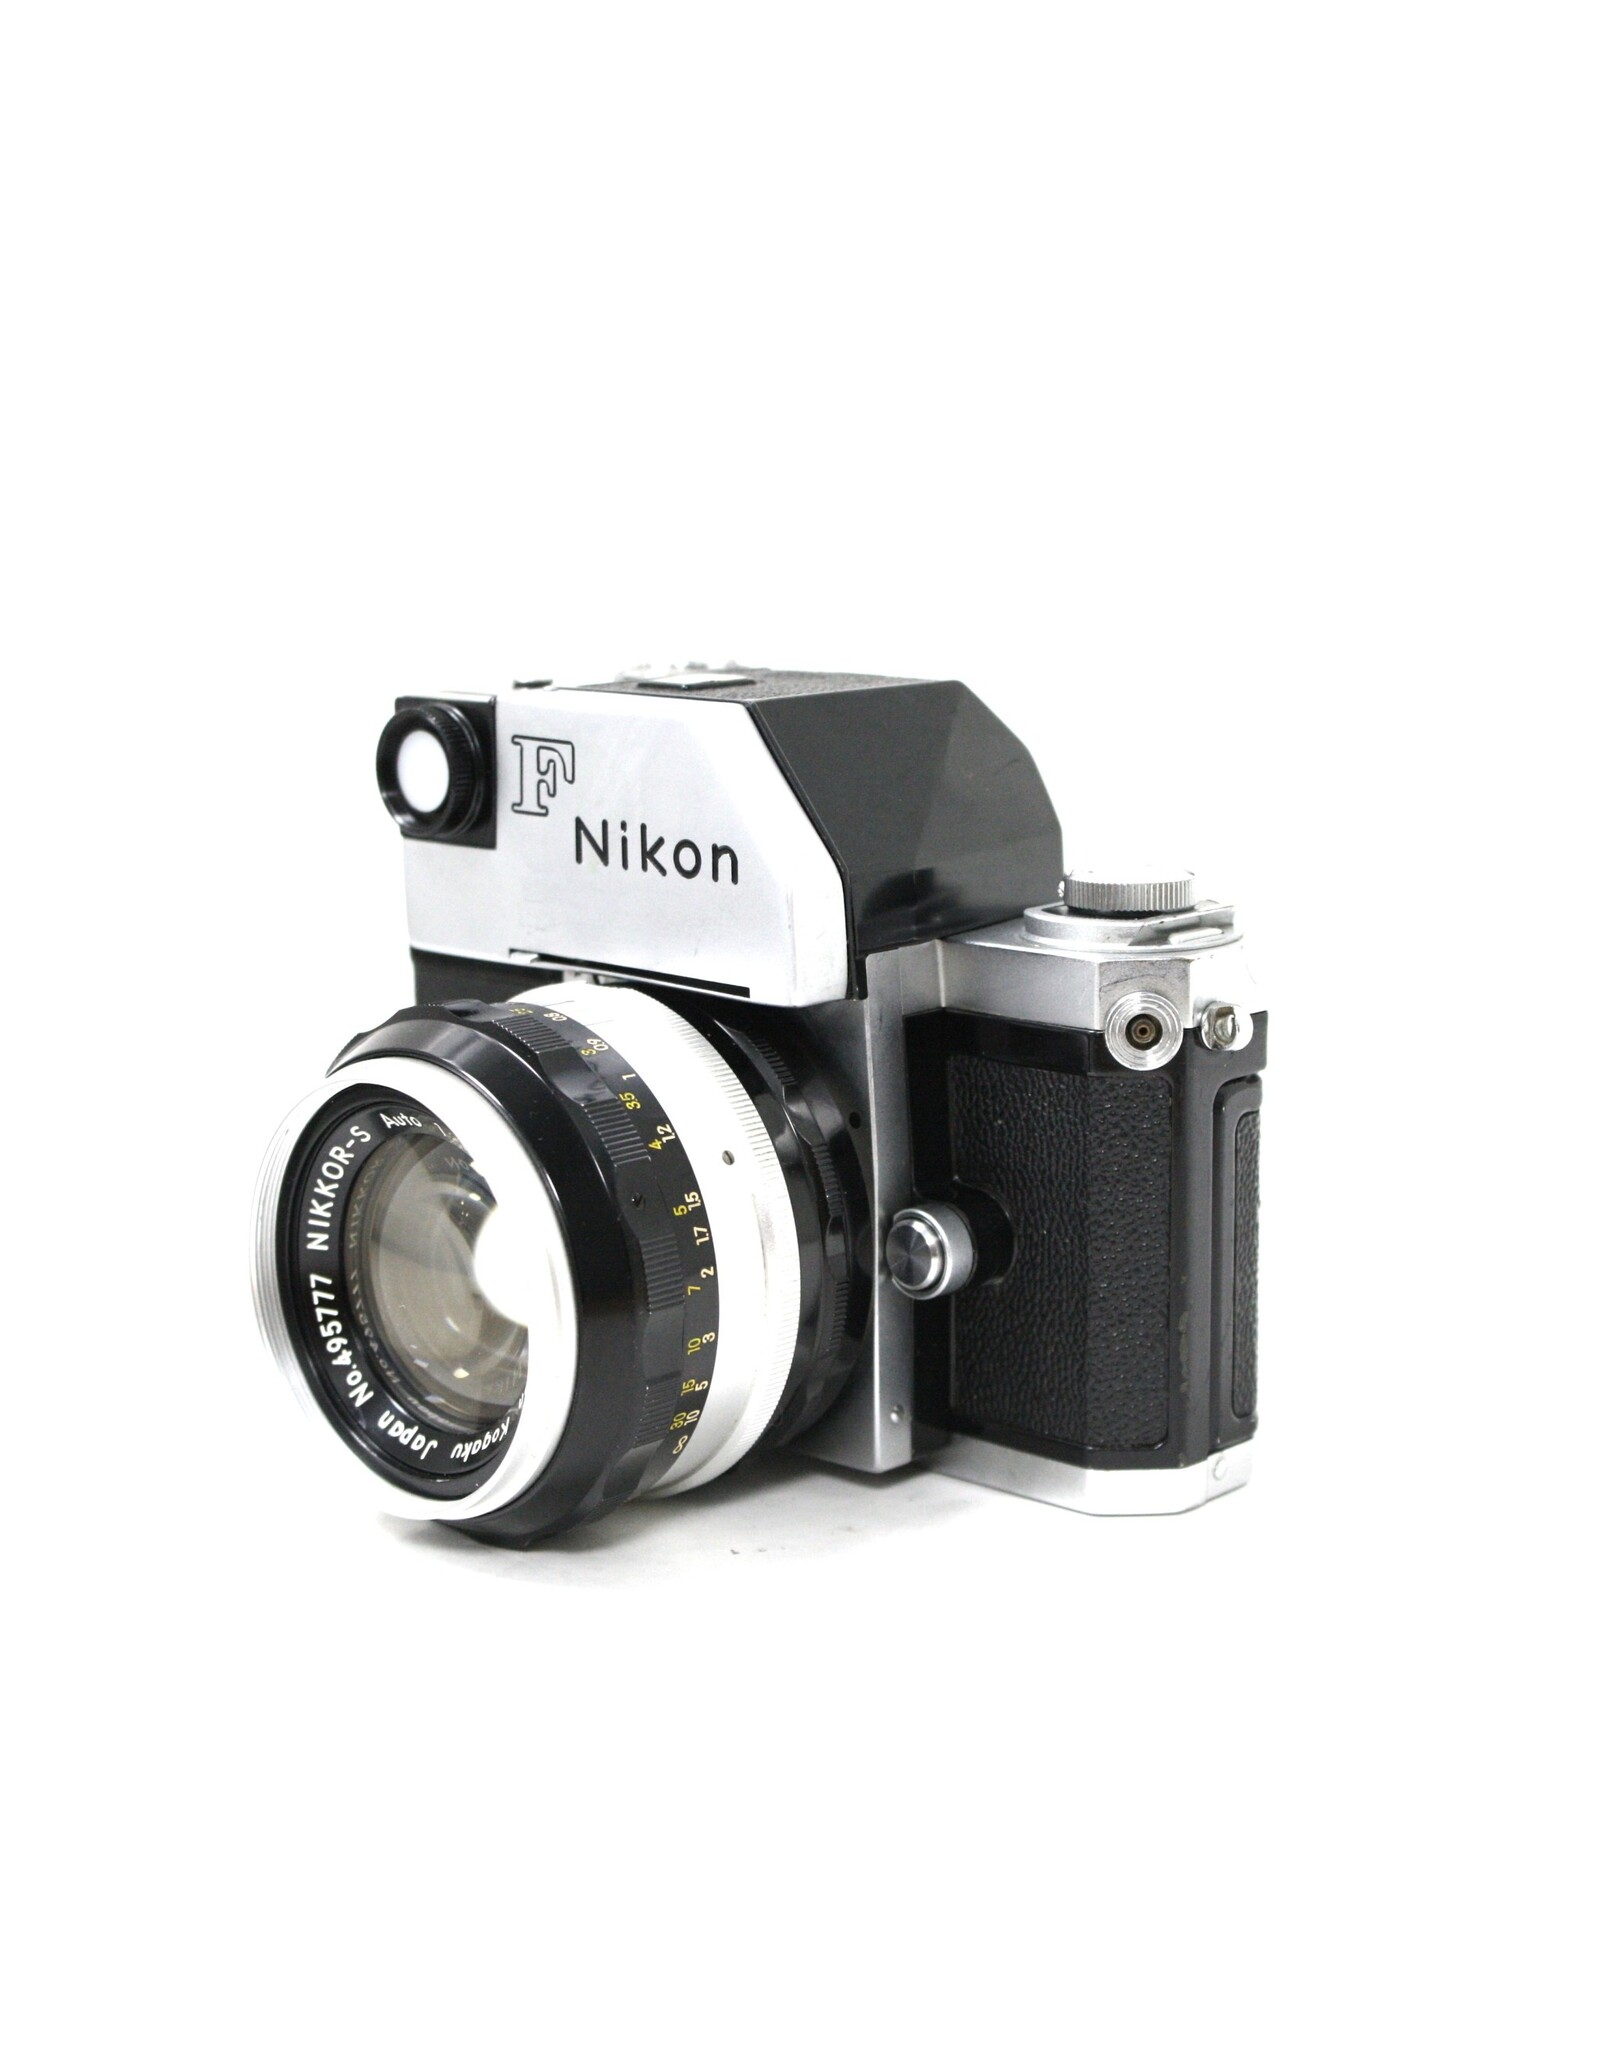 Nikon Nikon F Photomic FTn (#002) Film Camera w/ 50mm 1.4 Lens (Meter NG) with Case (Pre-Owned)